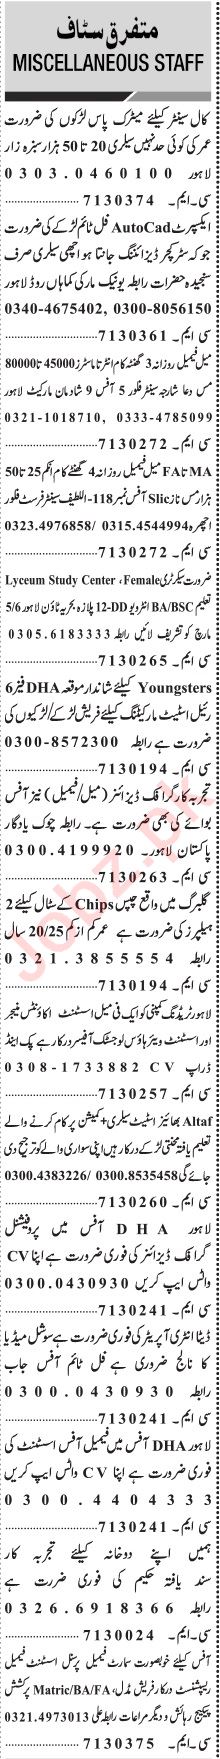 Customer Service Staff Jobs At Private Company In Lahore